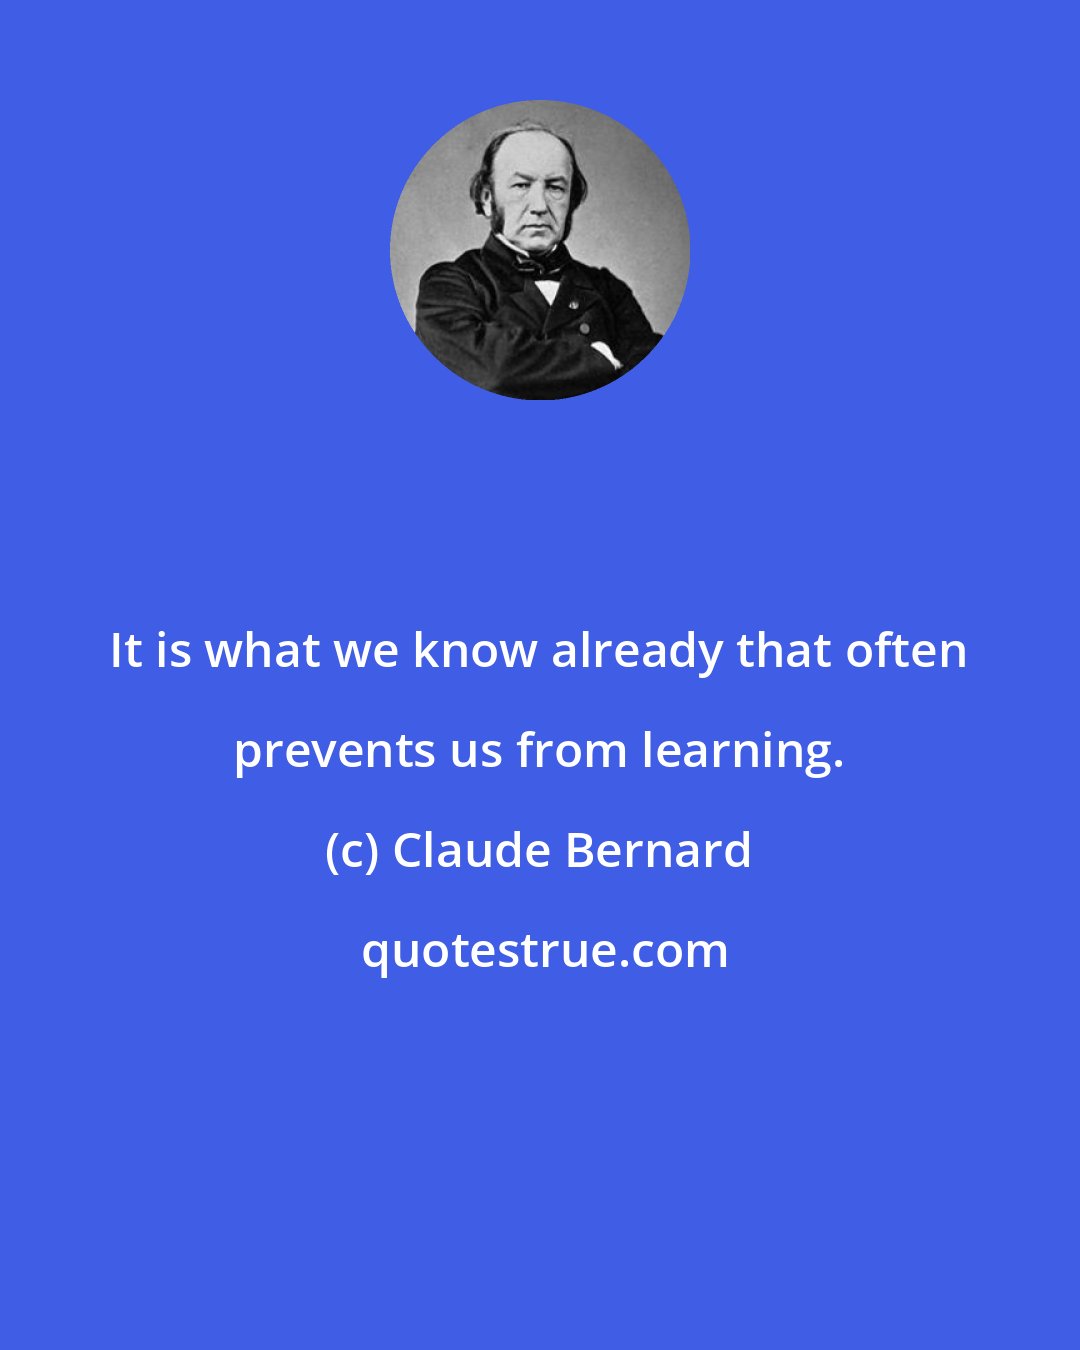 Claude Bernard: It is what we know already that often prevents us from learning.